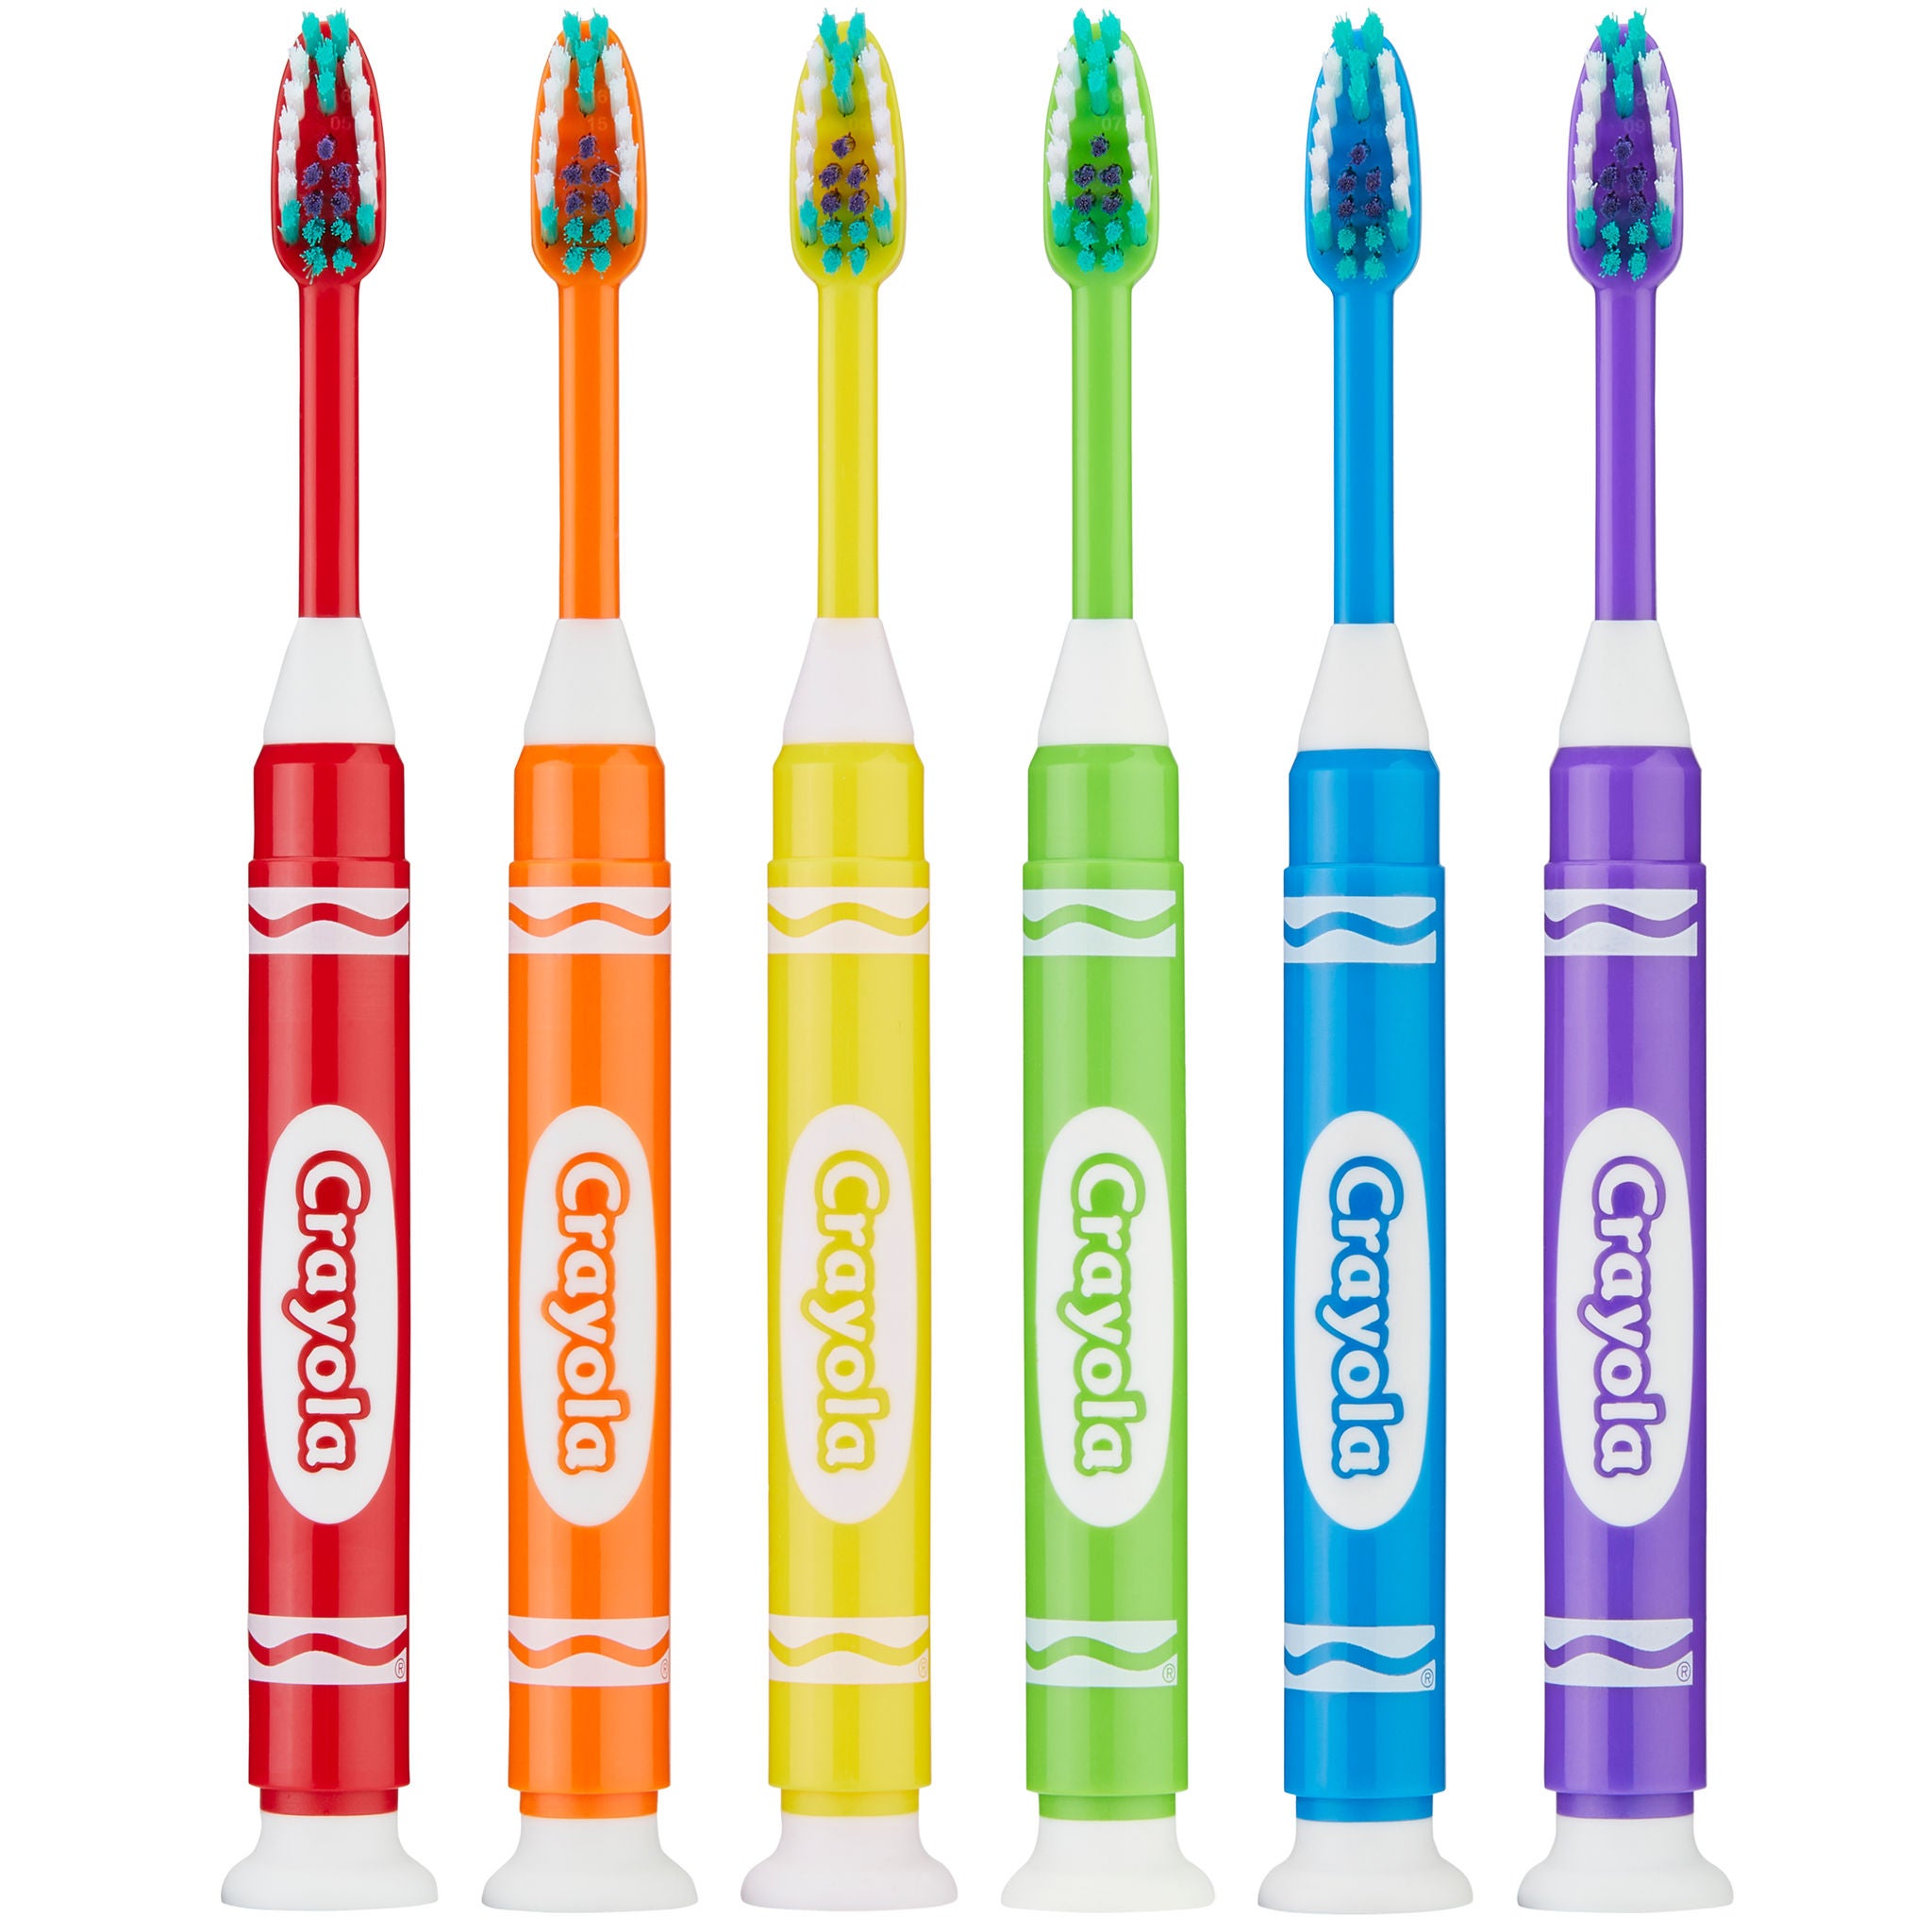 227-Product-Toothbrush-Manual-Crayola-Marker-naked-6colors.jpg